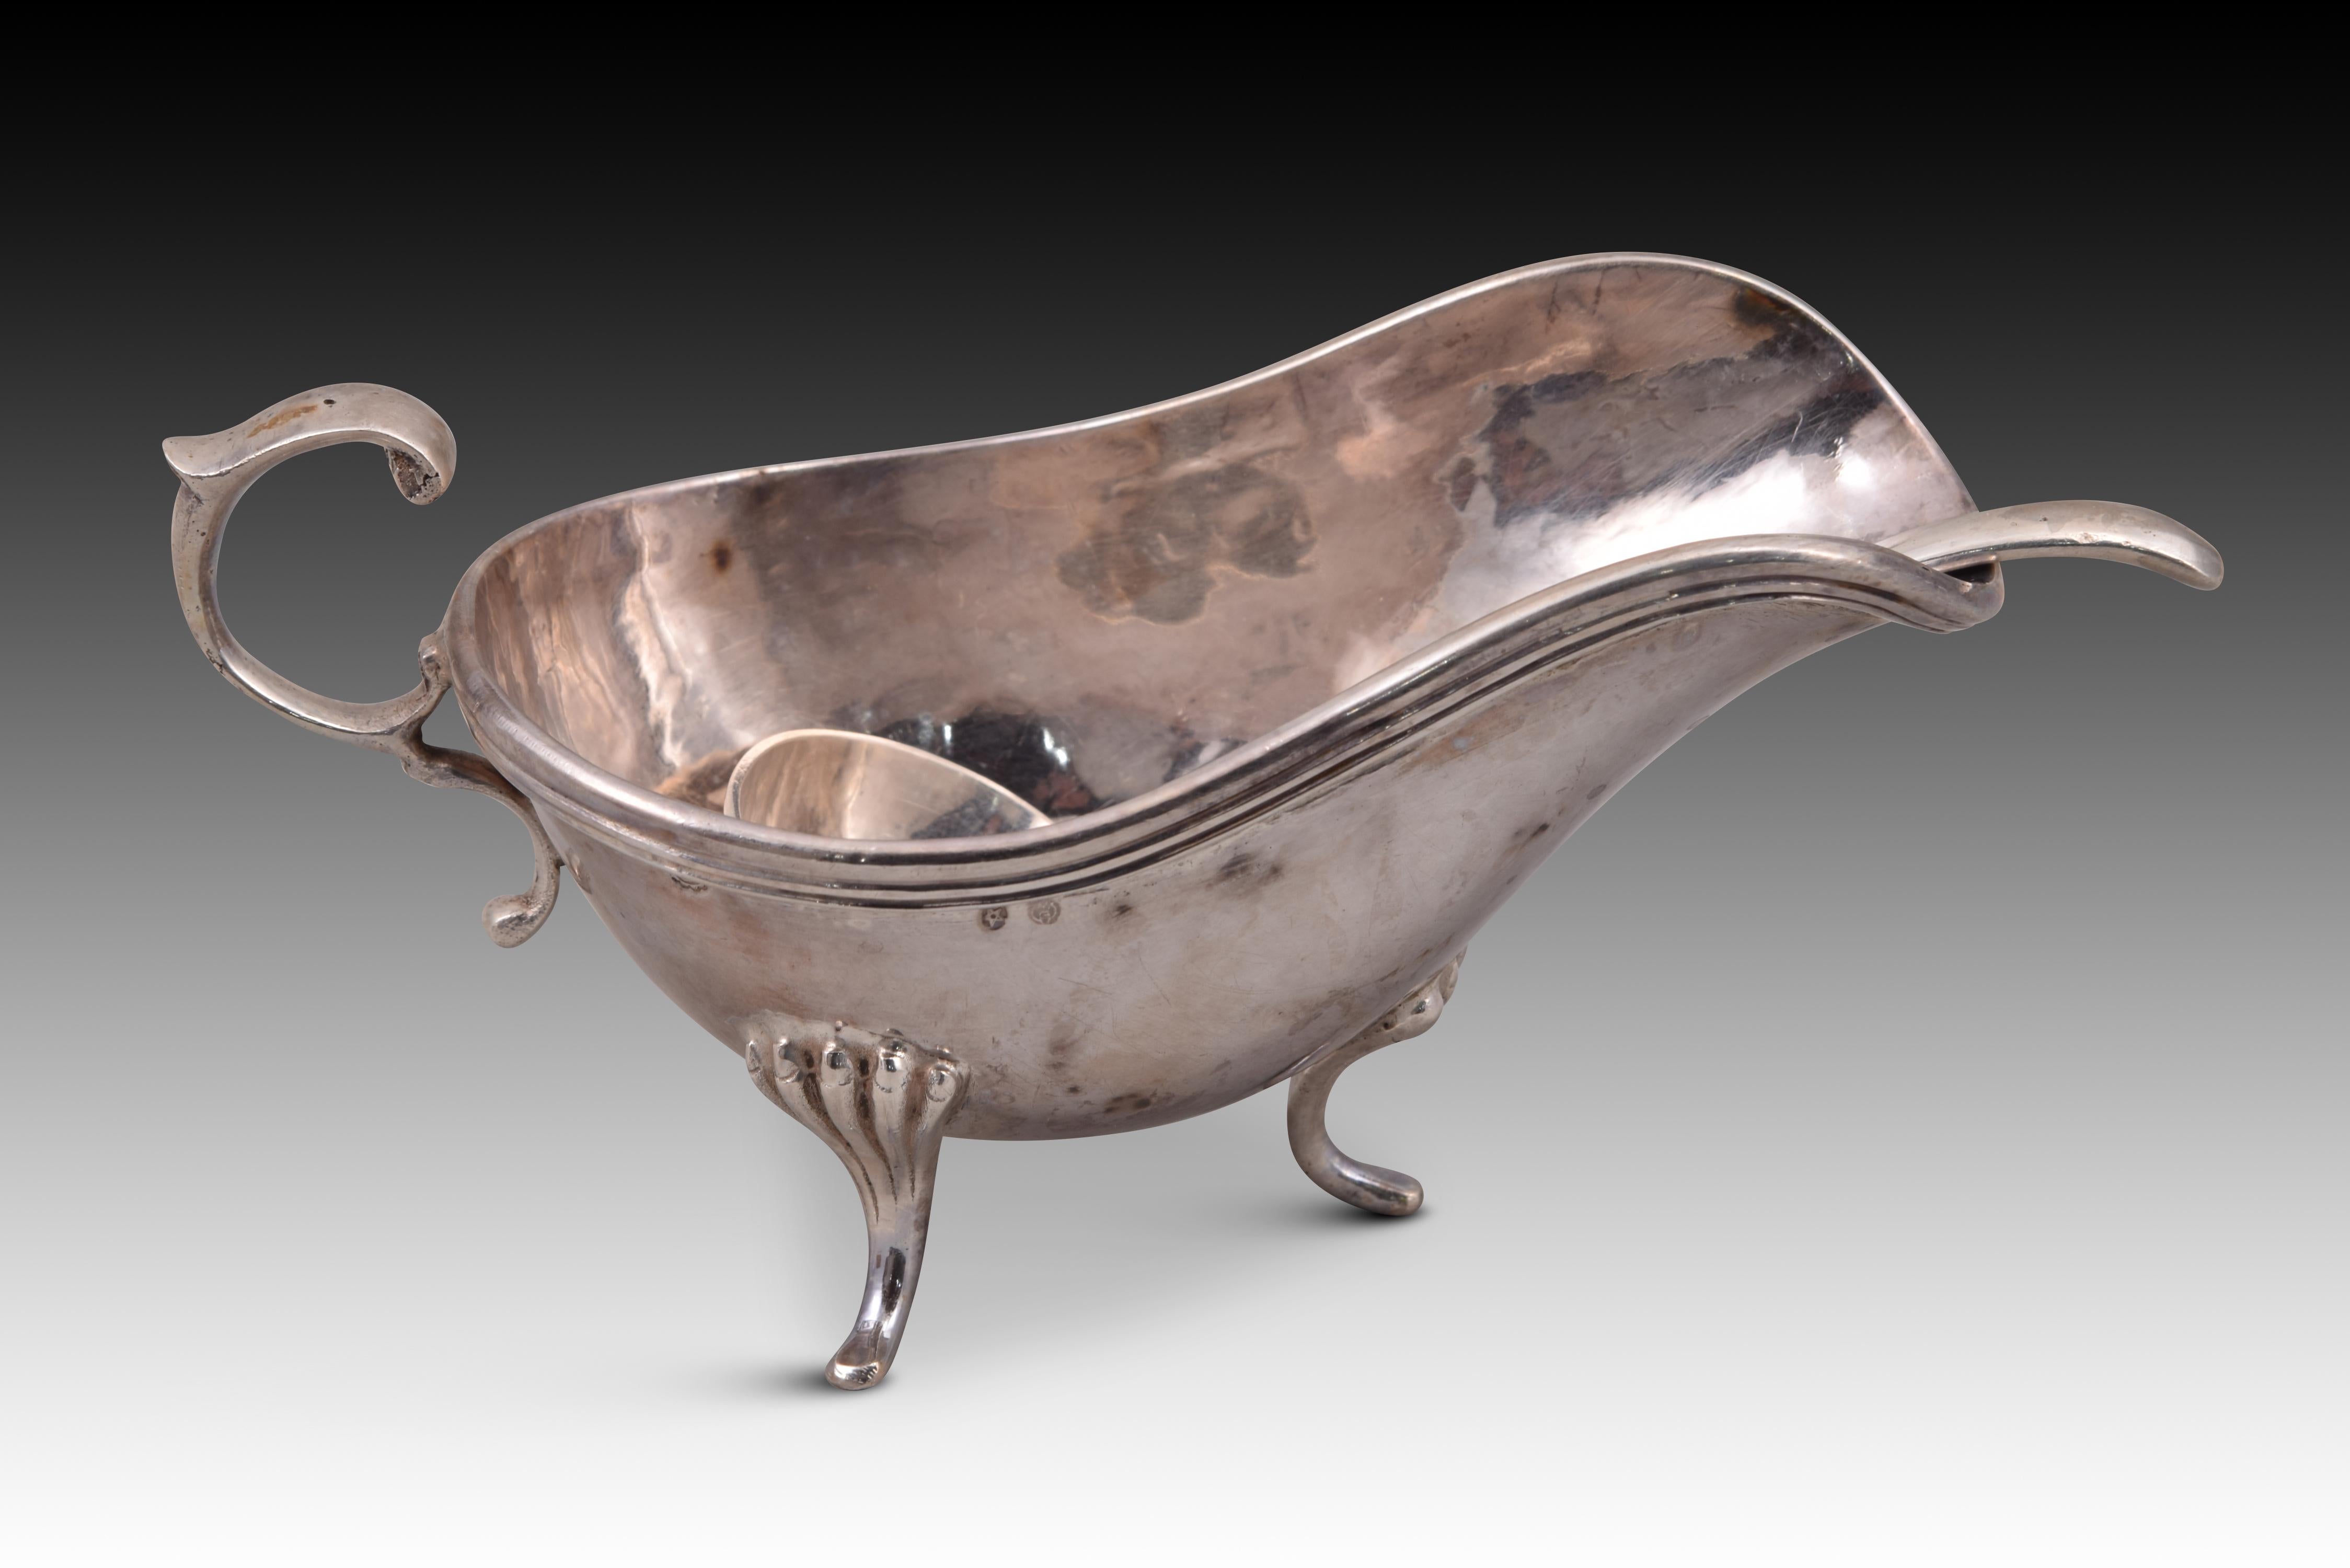 Sauceboat with saucepan. Silver. Manuel Garrido for Platerías López. Spain, Madrid, 20th century. 
With contrast markings. 
Silver sauce boat in its color with an oval shape and finished in a spout, which has a ce shaped handle and three legs